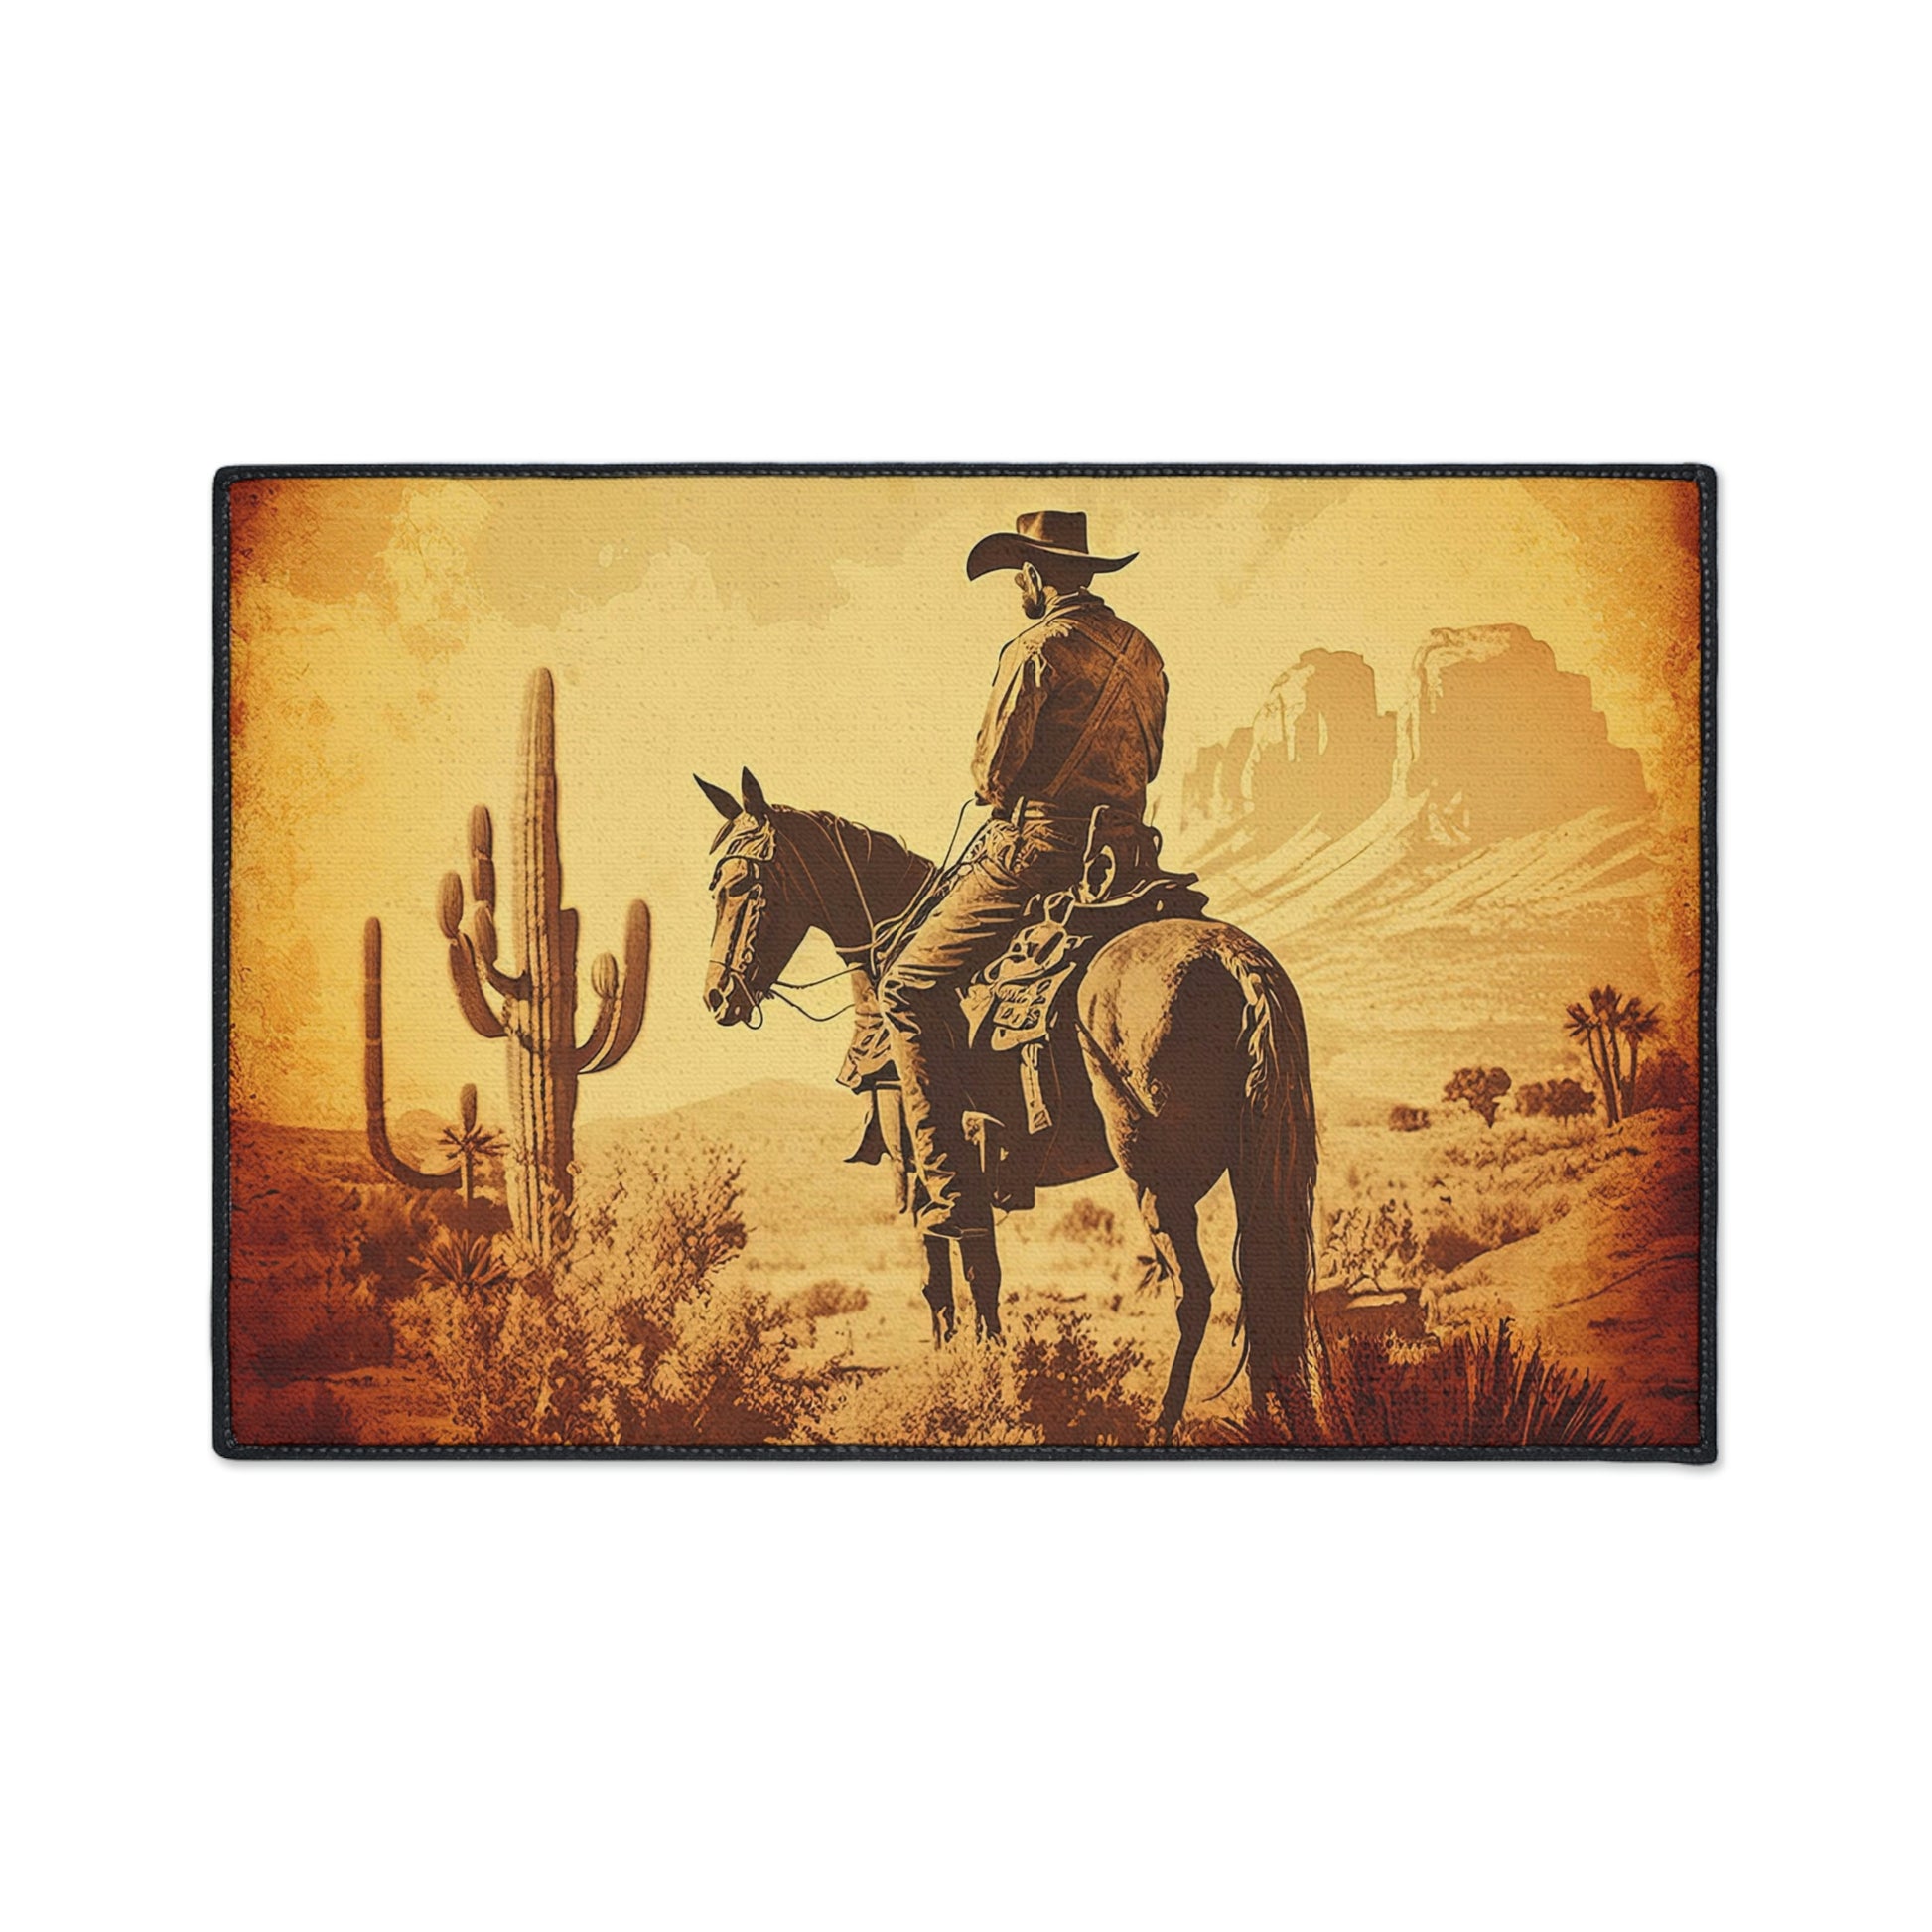 "Cowboy Riding A Horse" Door Mat - Weave Got Gifts - Unique Gifts You Won’t Find Anywhere Else!